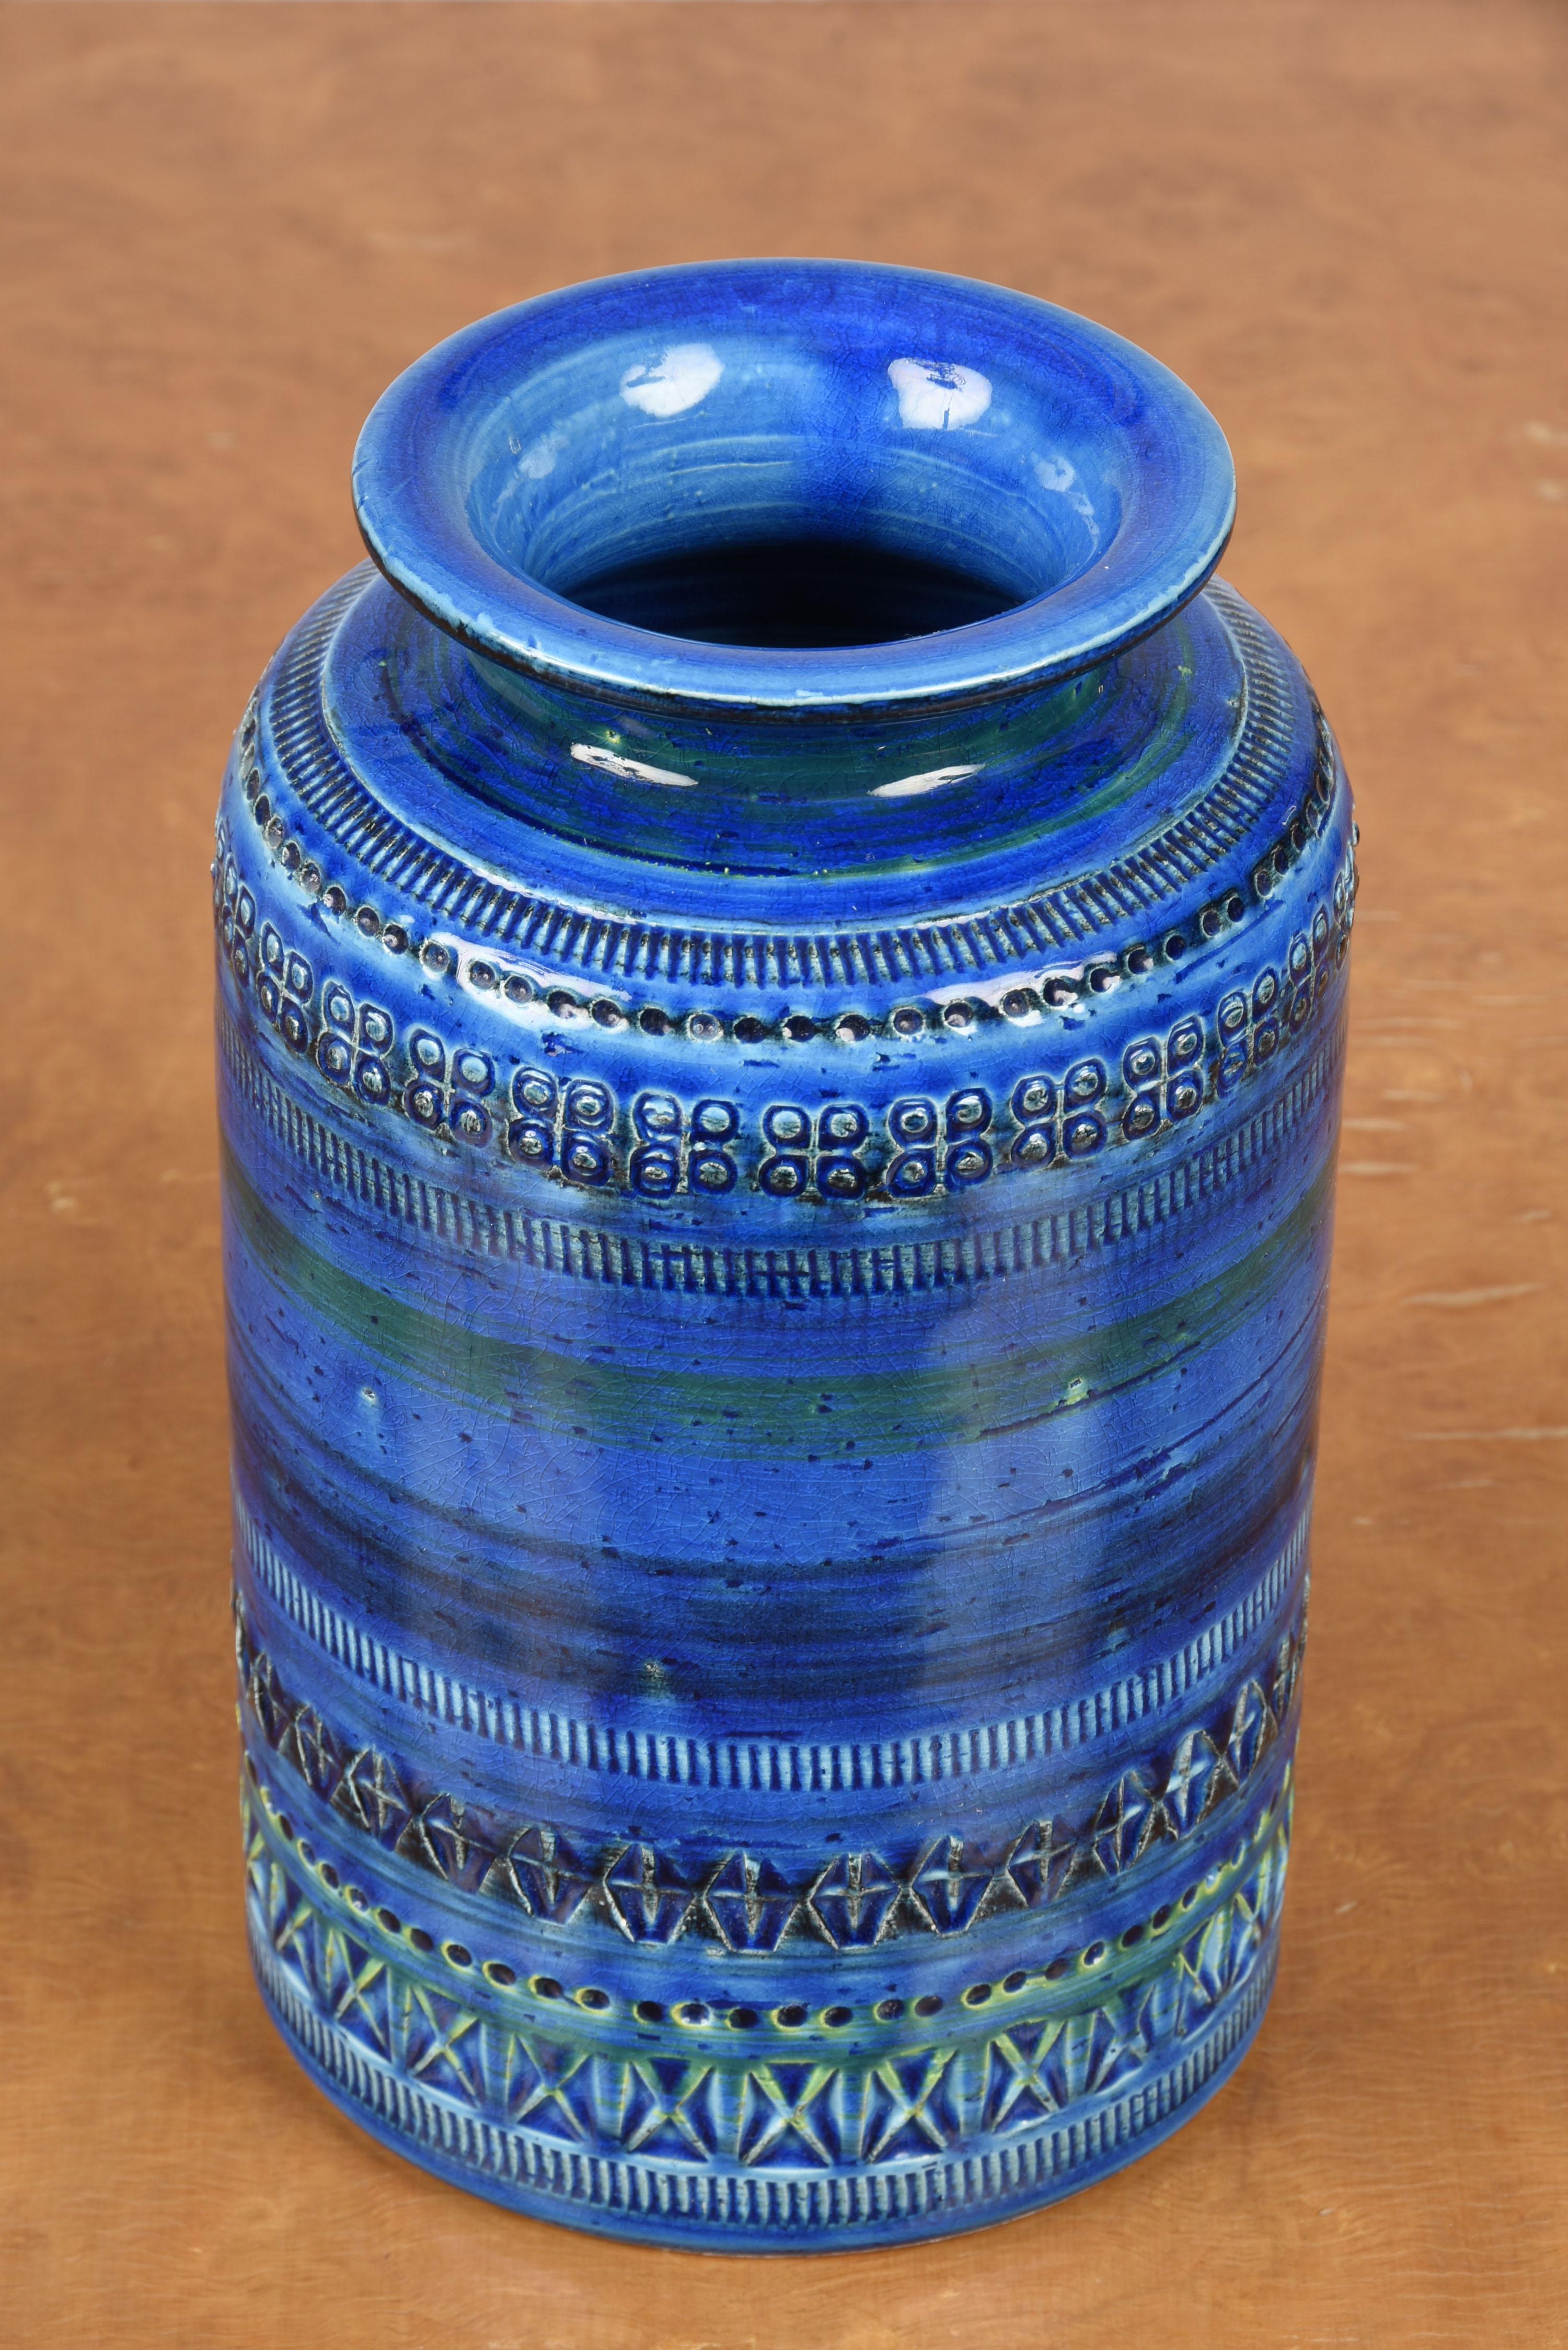 Amazing midcentury blue glazed terracotta ceramic blue vase. This fantastic item was designed by Flavia Montelupo and Aldo Londi for Bitossi in Italy, Rimini, during the late 1950s or early 1960s.

This magnificent piece was handcrafted in Italy